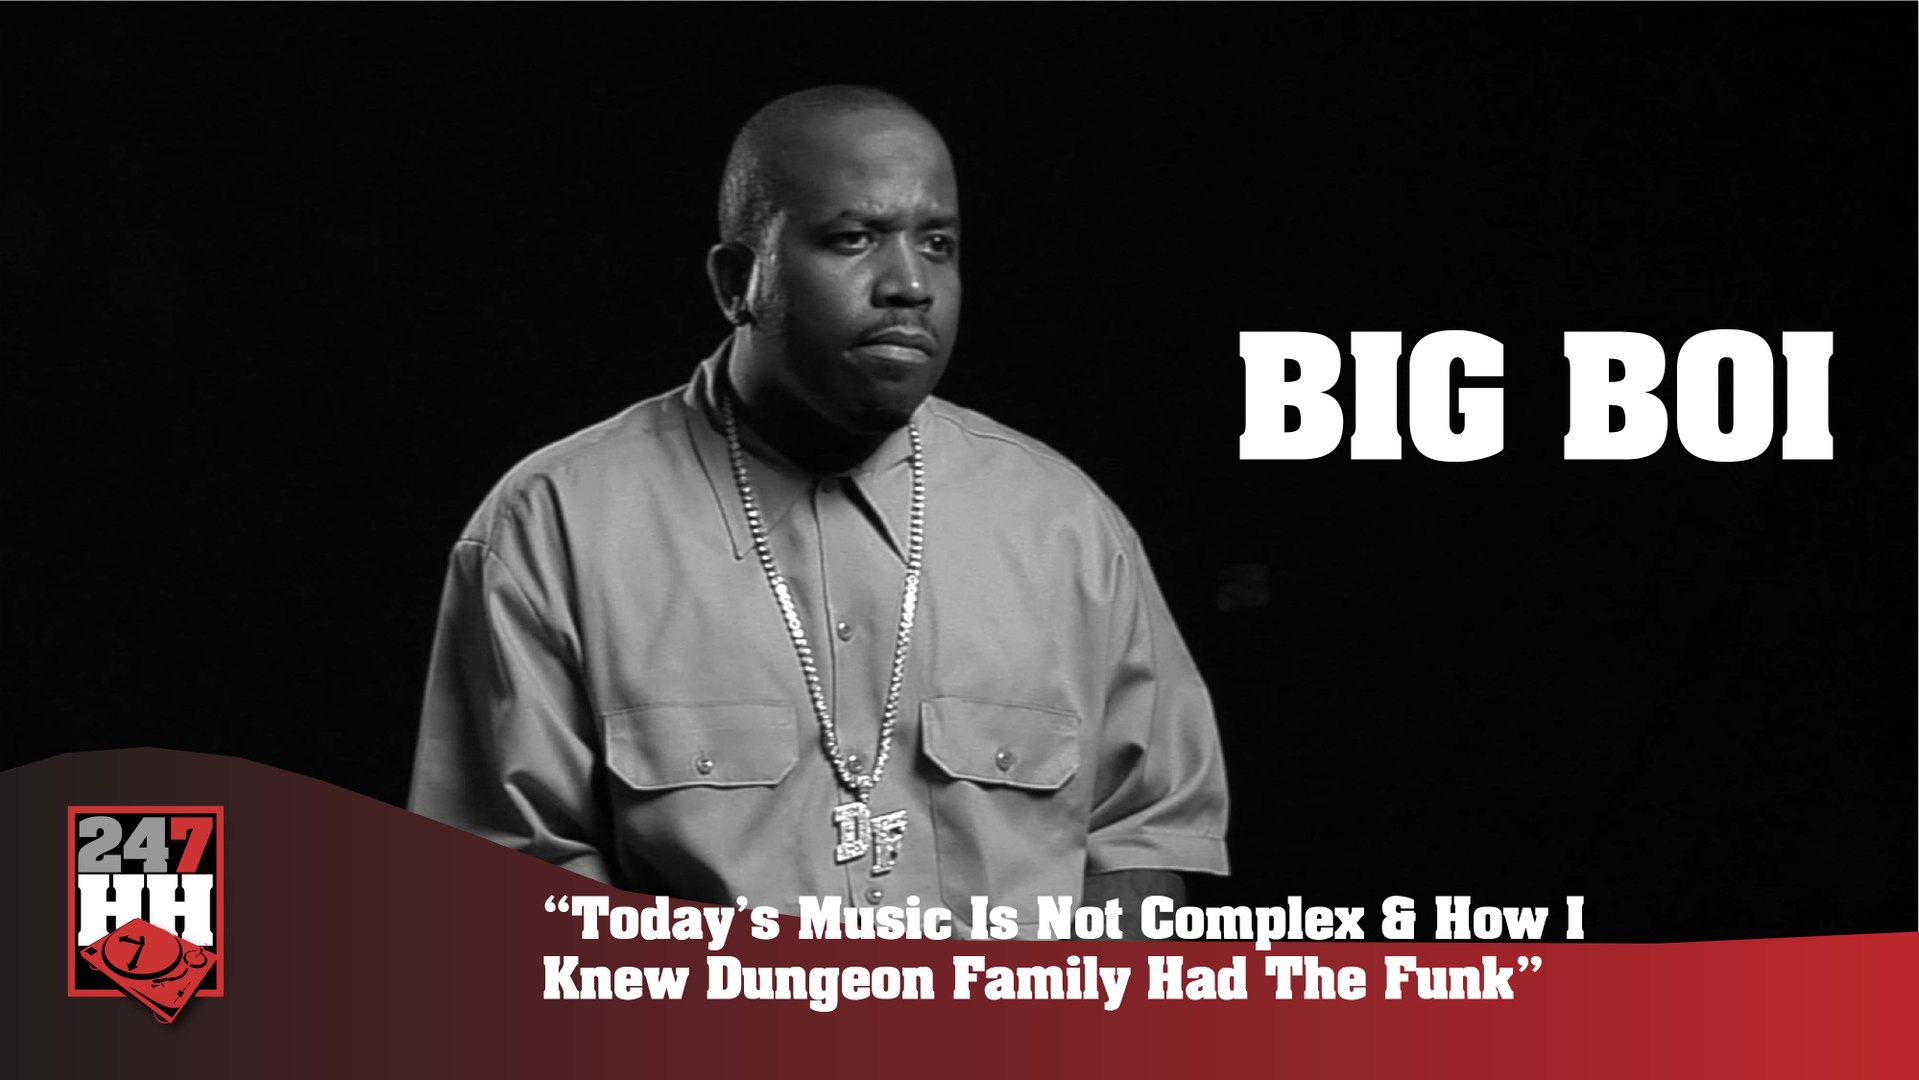 ⁣Big Boi - Today's Music Is Not Complex & How I Knew Dungeon Family Had The Funk (247HH Arch